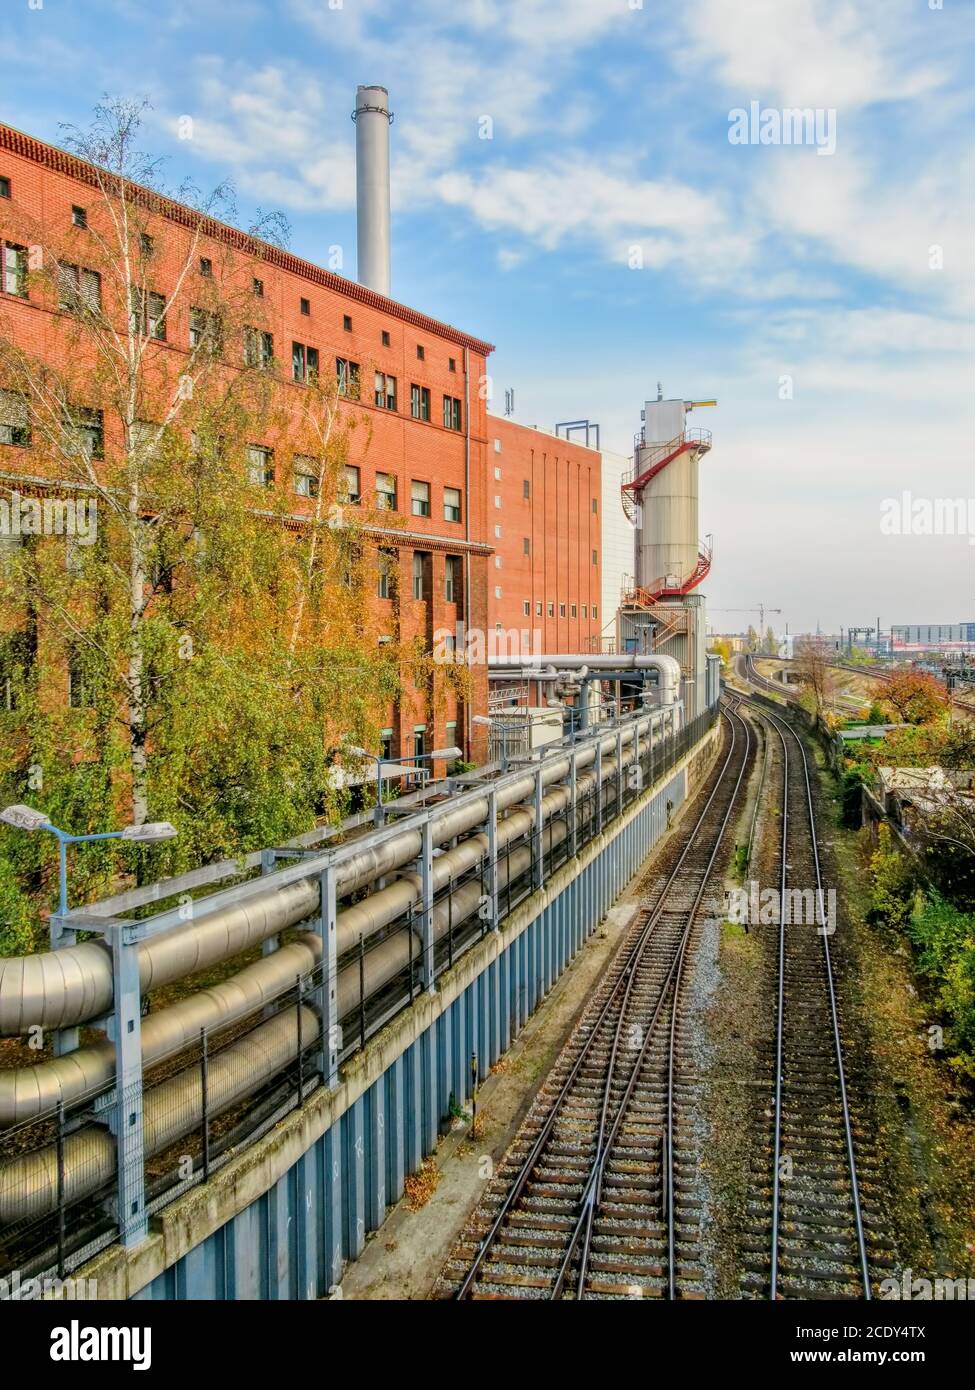 Railway tracks at an industrial site in Berlin Westend, Germany Stock Photo